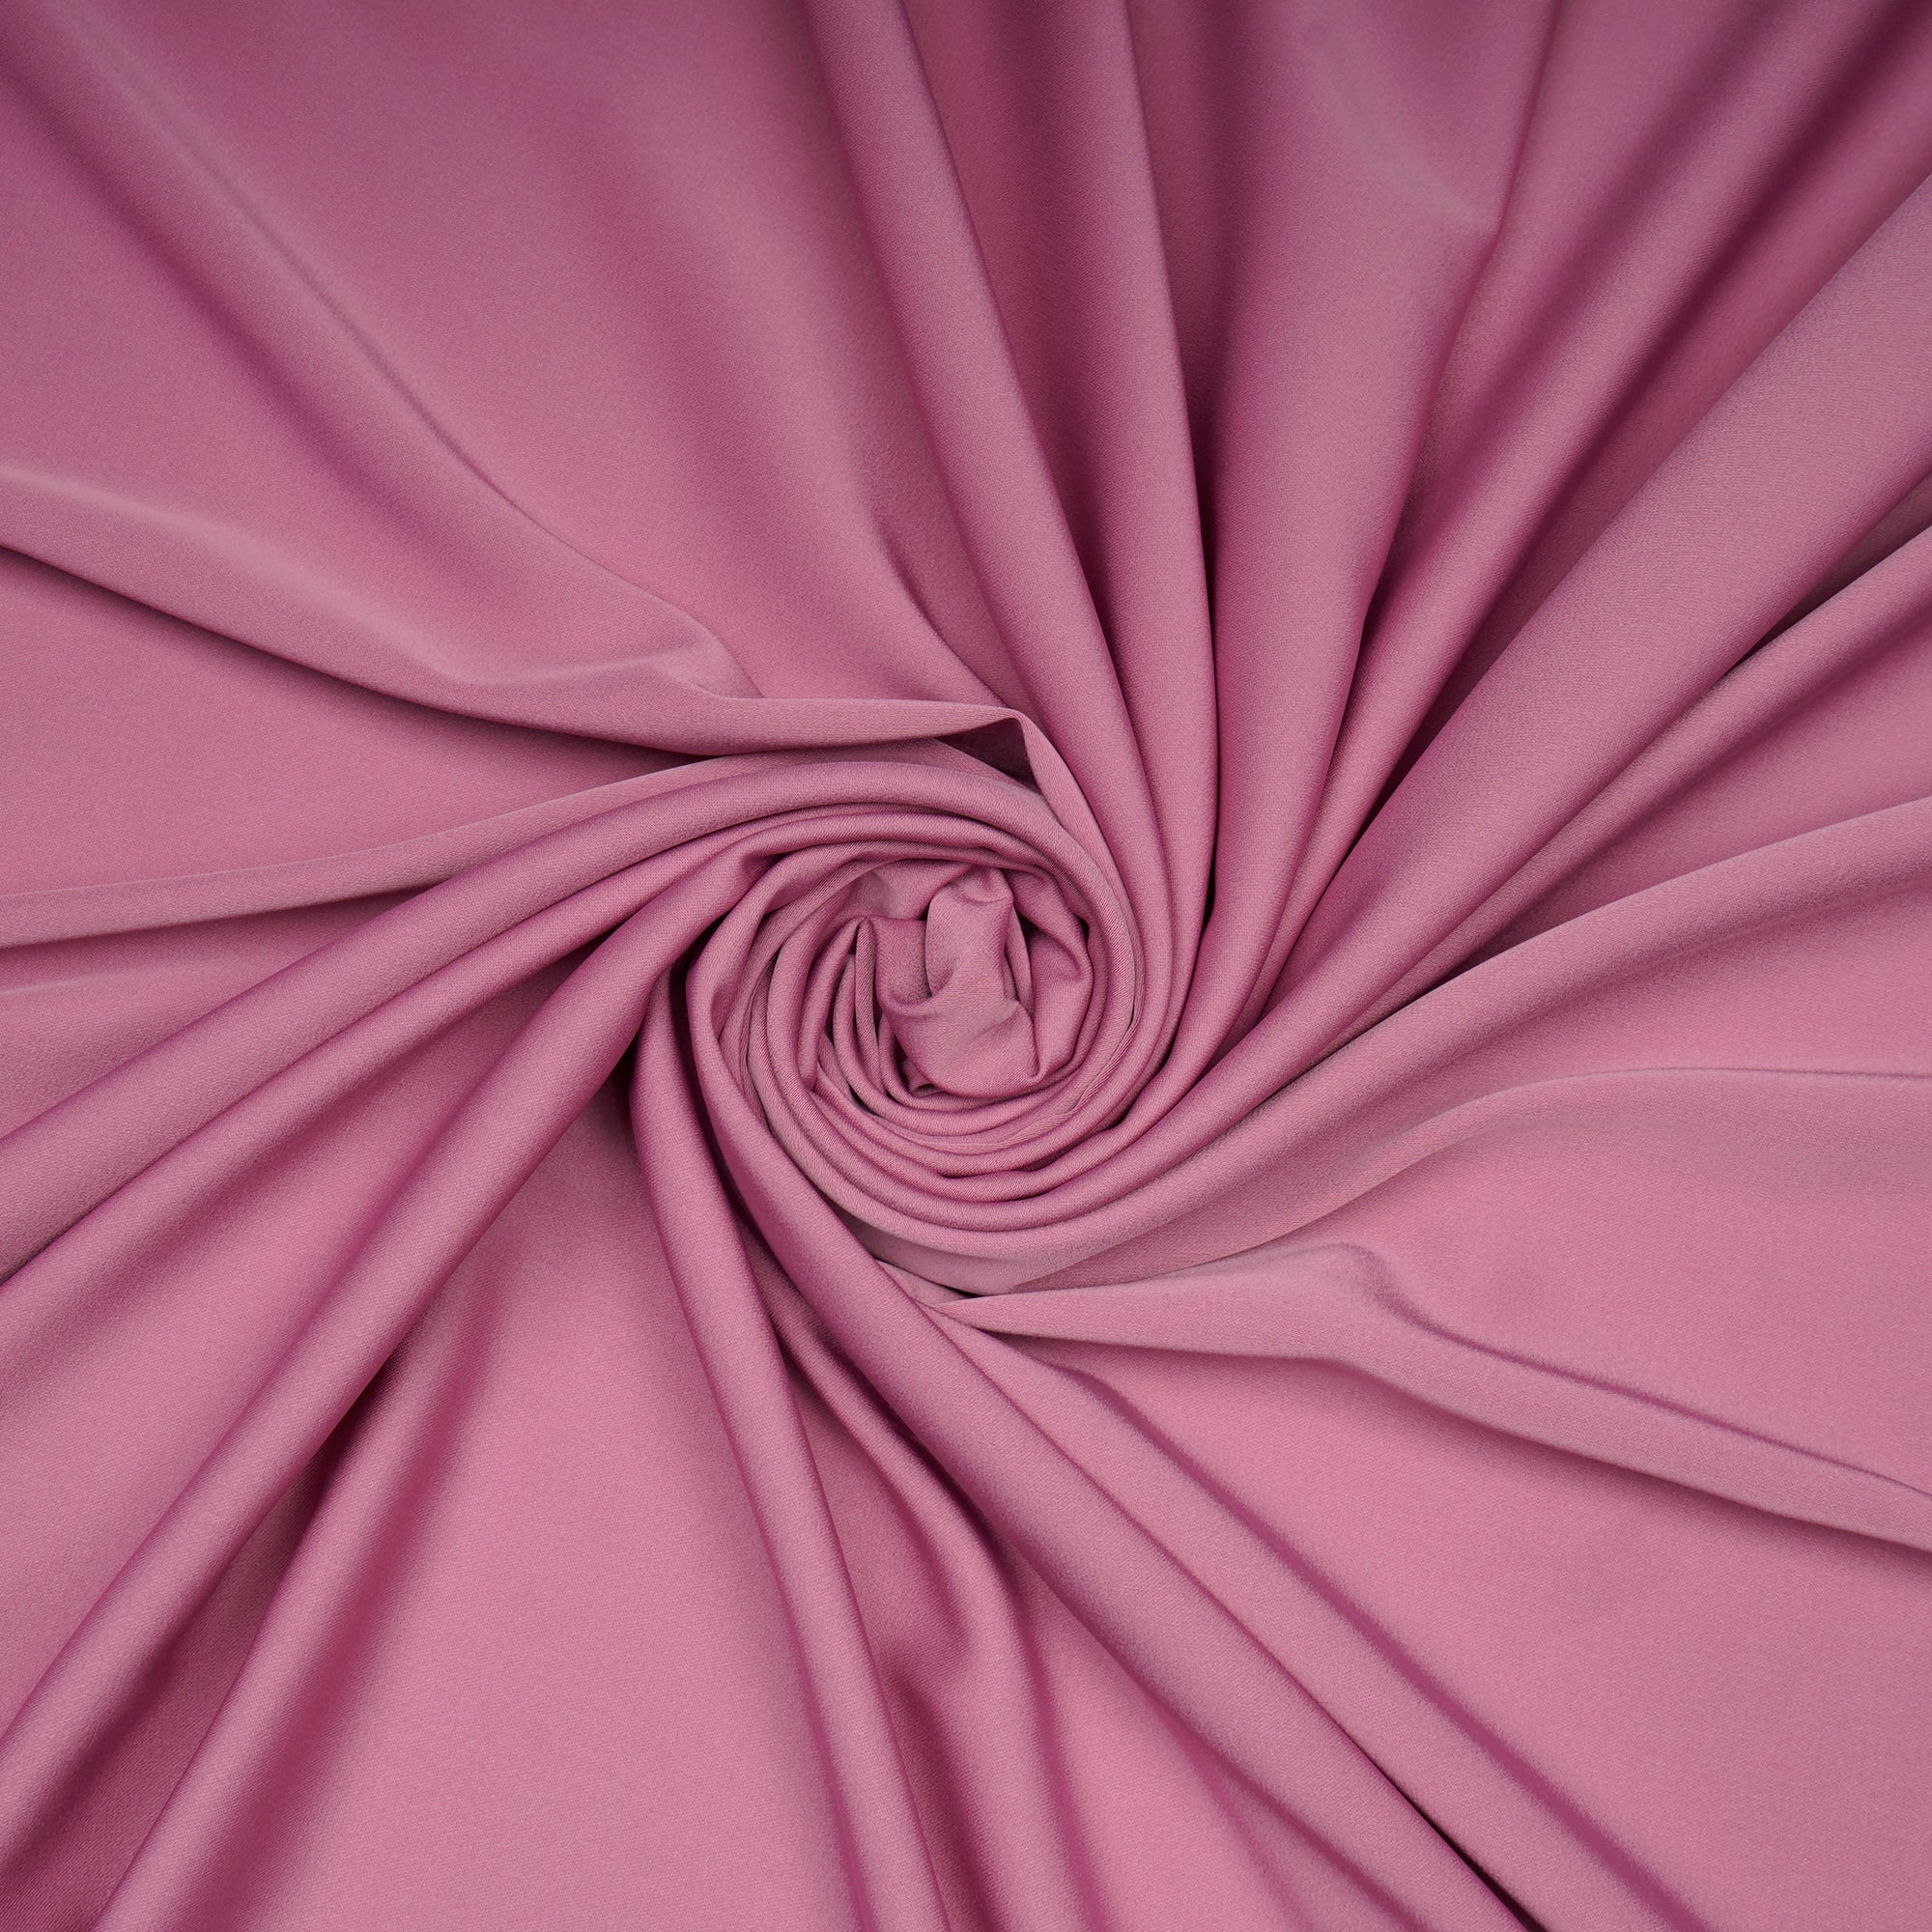 Blush Pink Solid Dyed Imported Prada Crepe Fabric (60" Width)